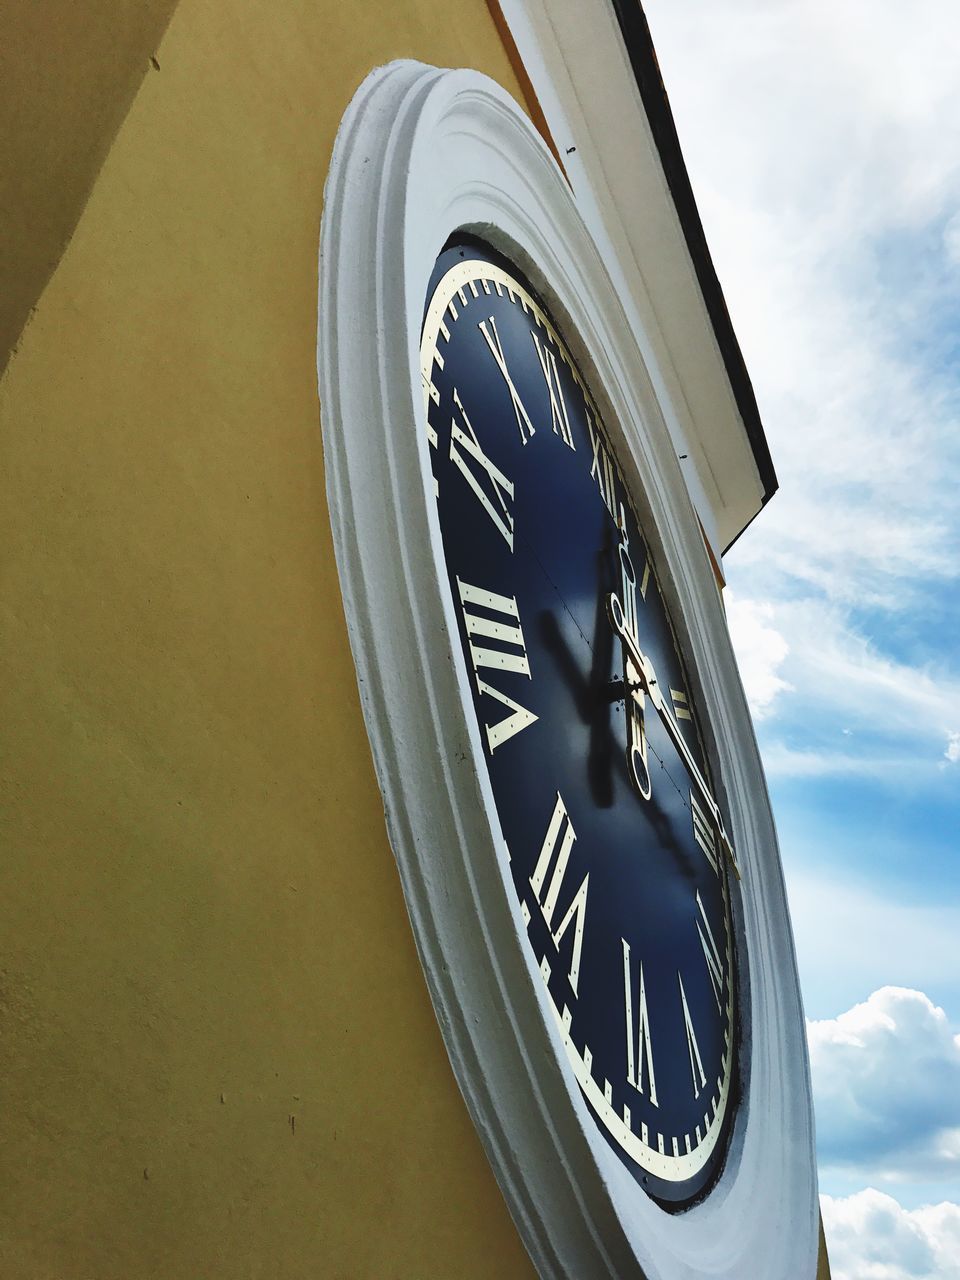 time, clock, minute hand, no people, clock face, close-up, low angle view, roman numeral, hour hand, day, indoors, sky